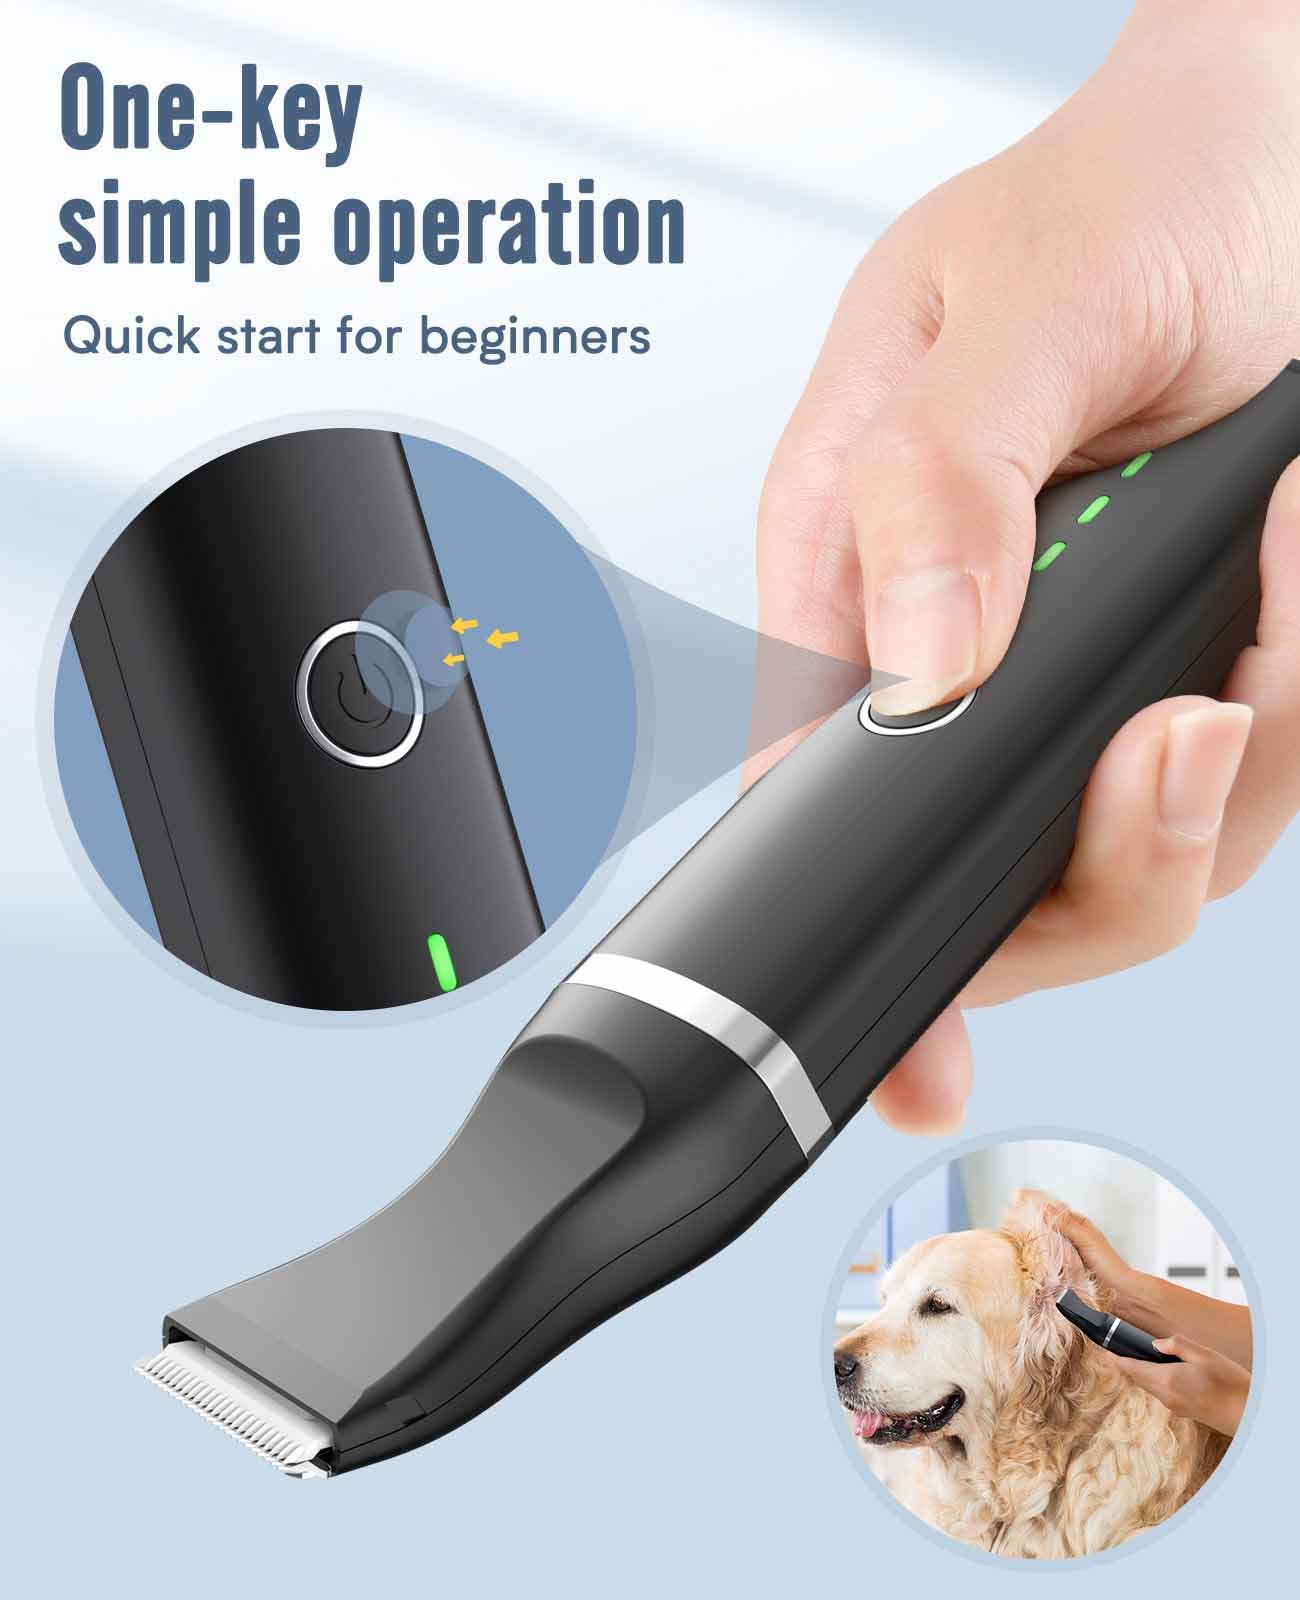 
                  
                    Oneisall Dog Clippers/Dog Paw Trimmer -N6
                  
                